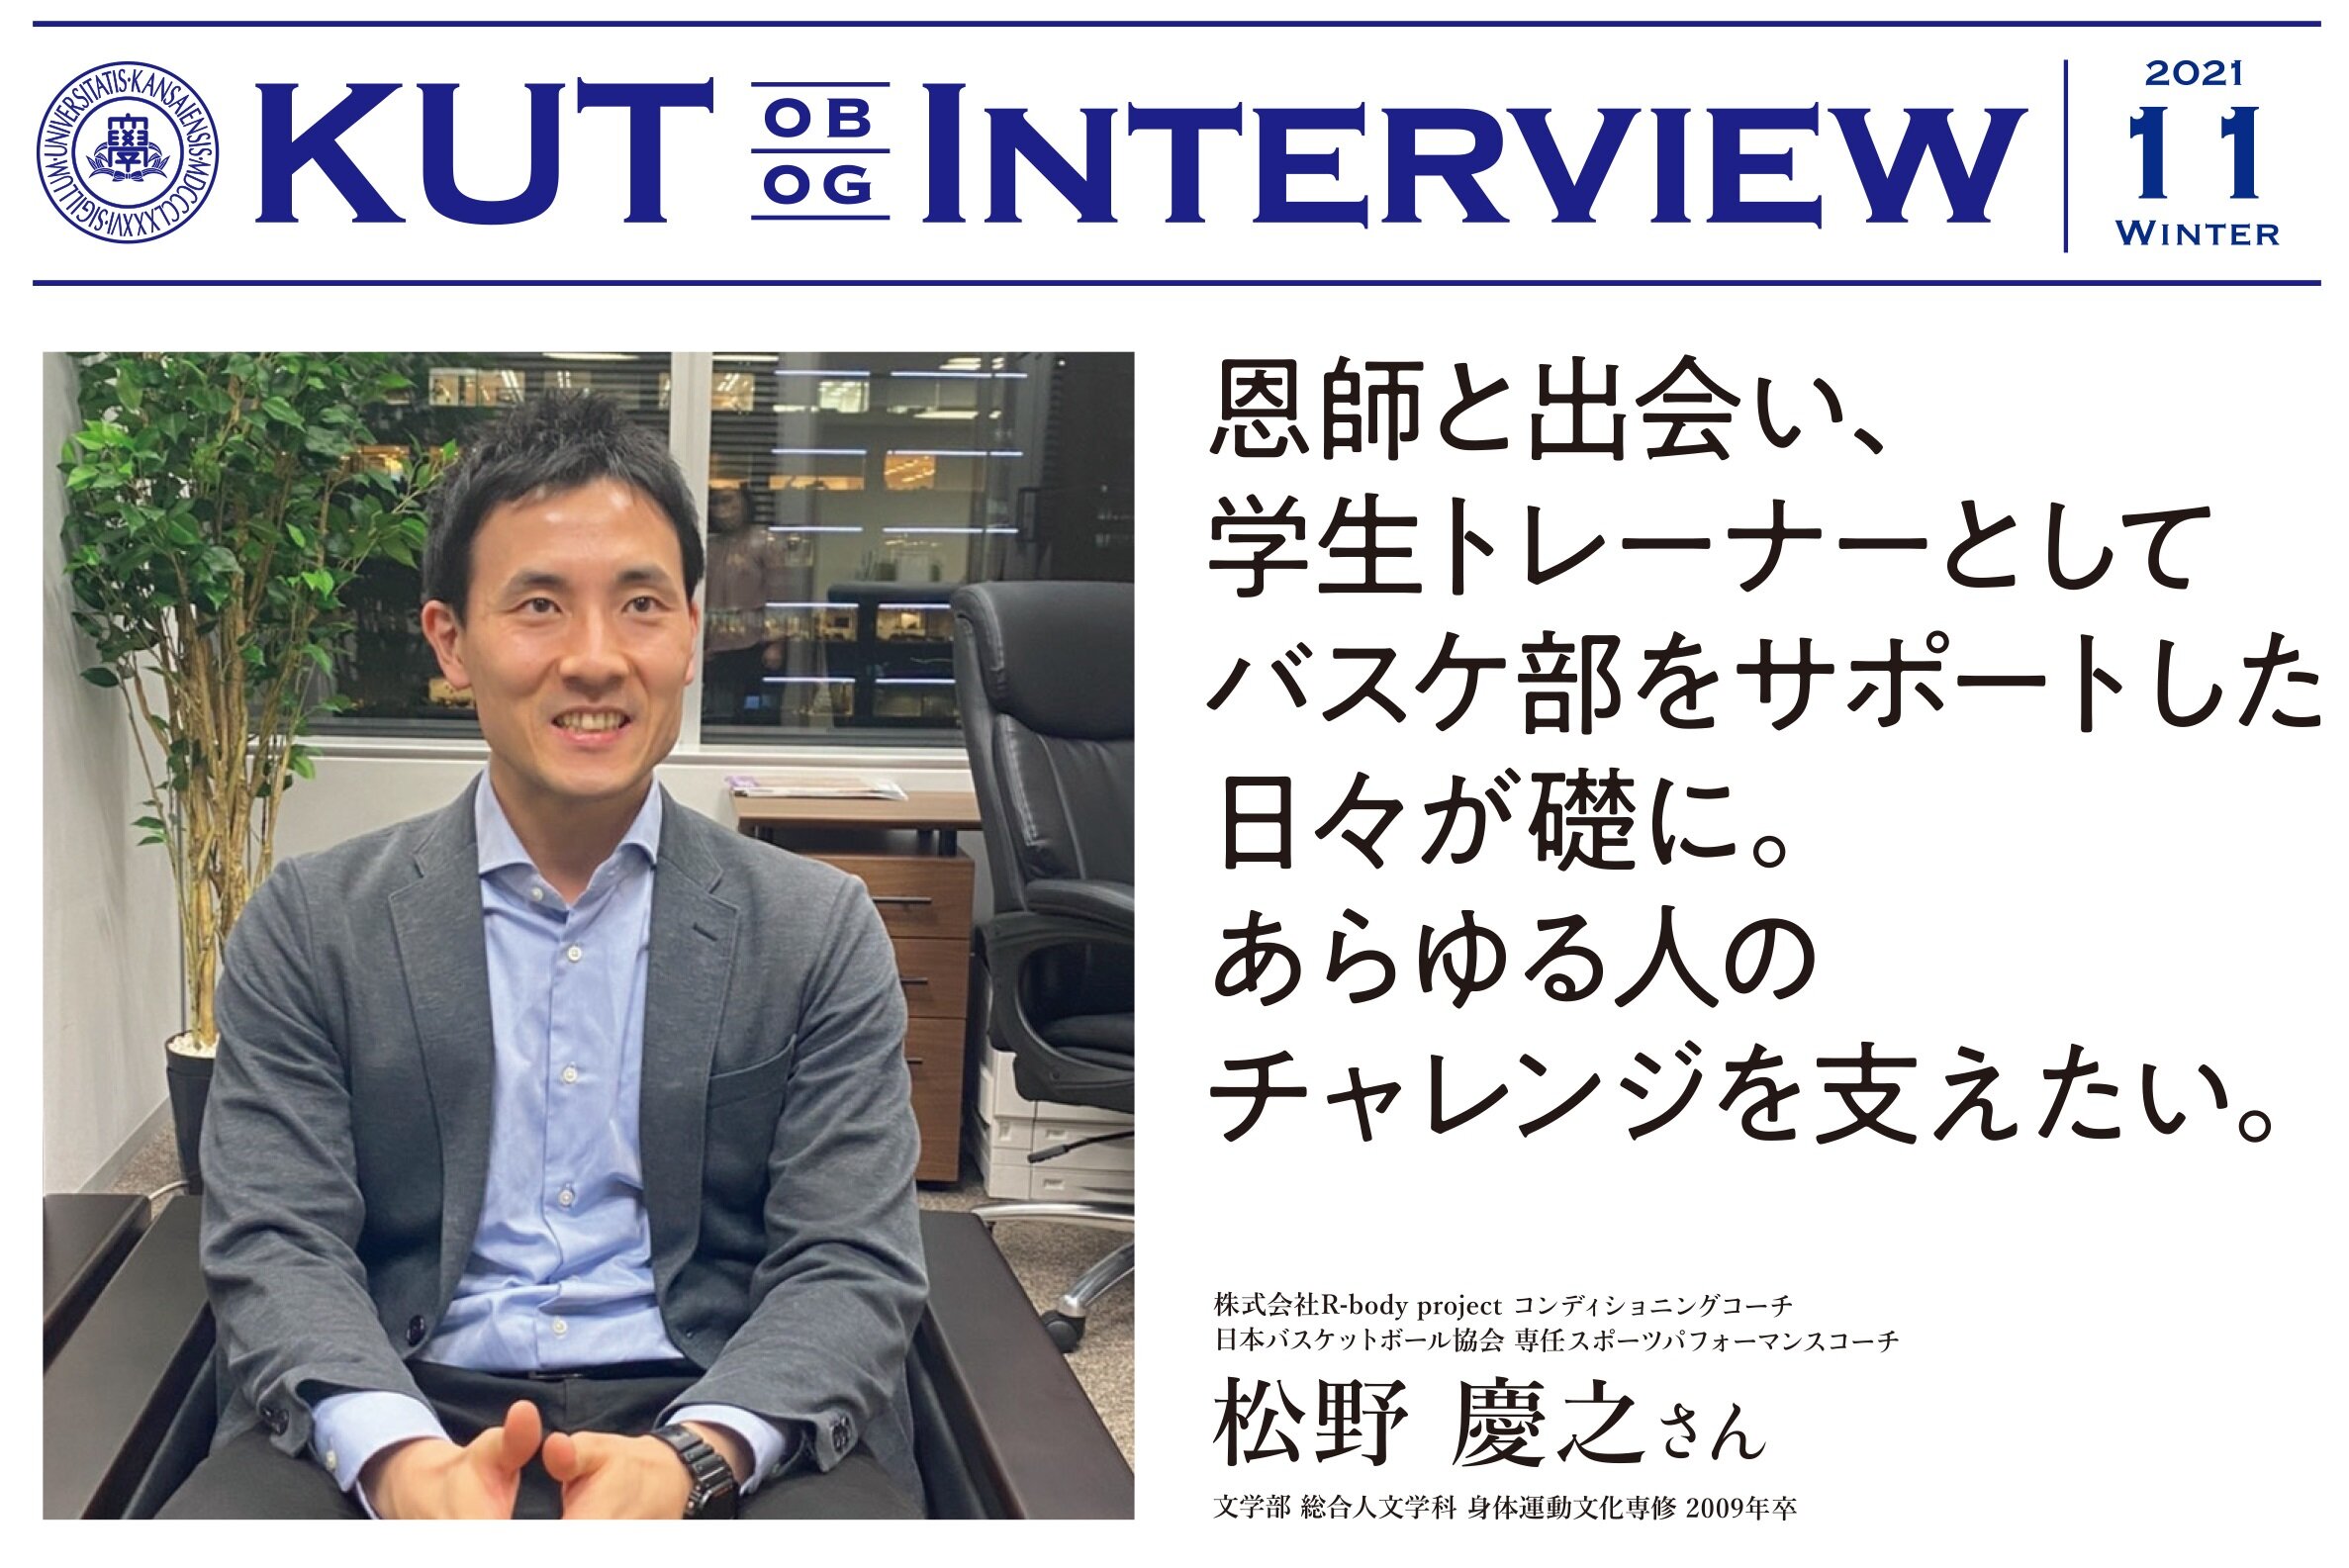 〈KUT INTERVIEW 第１１号〉首都圏で活躍する卒業生をご紹介します！